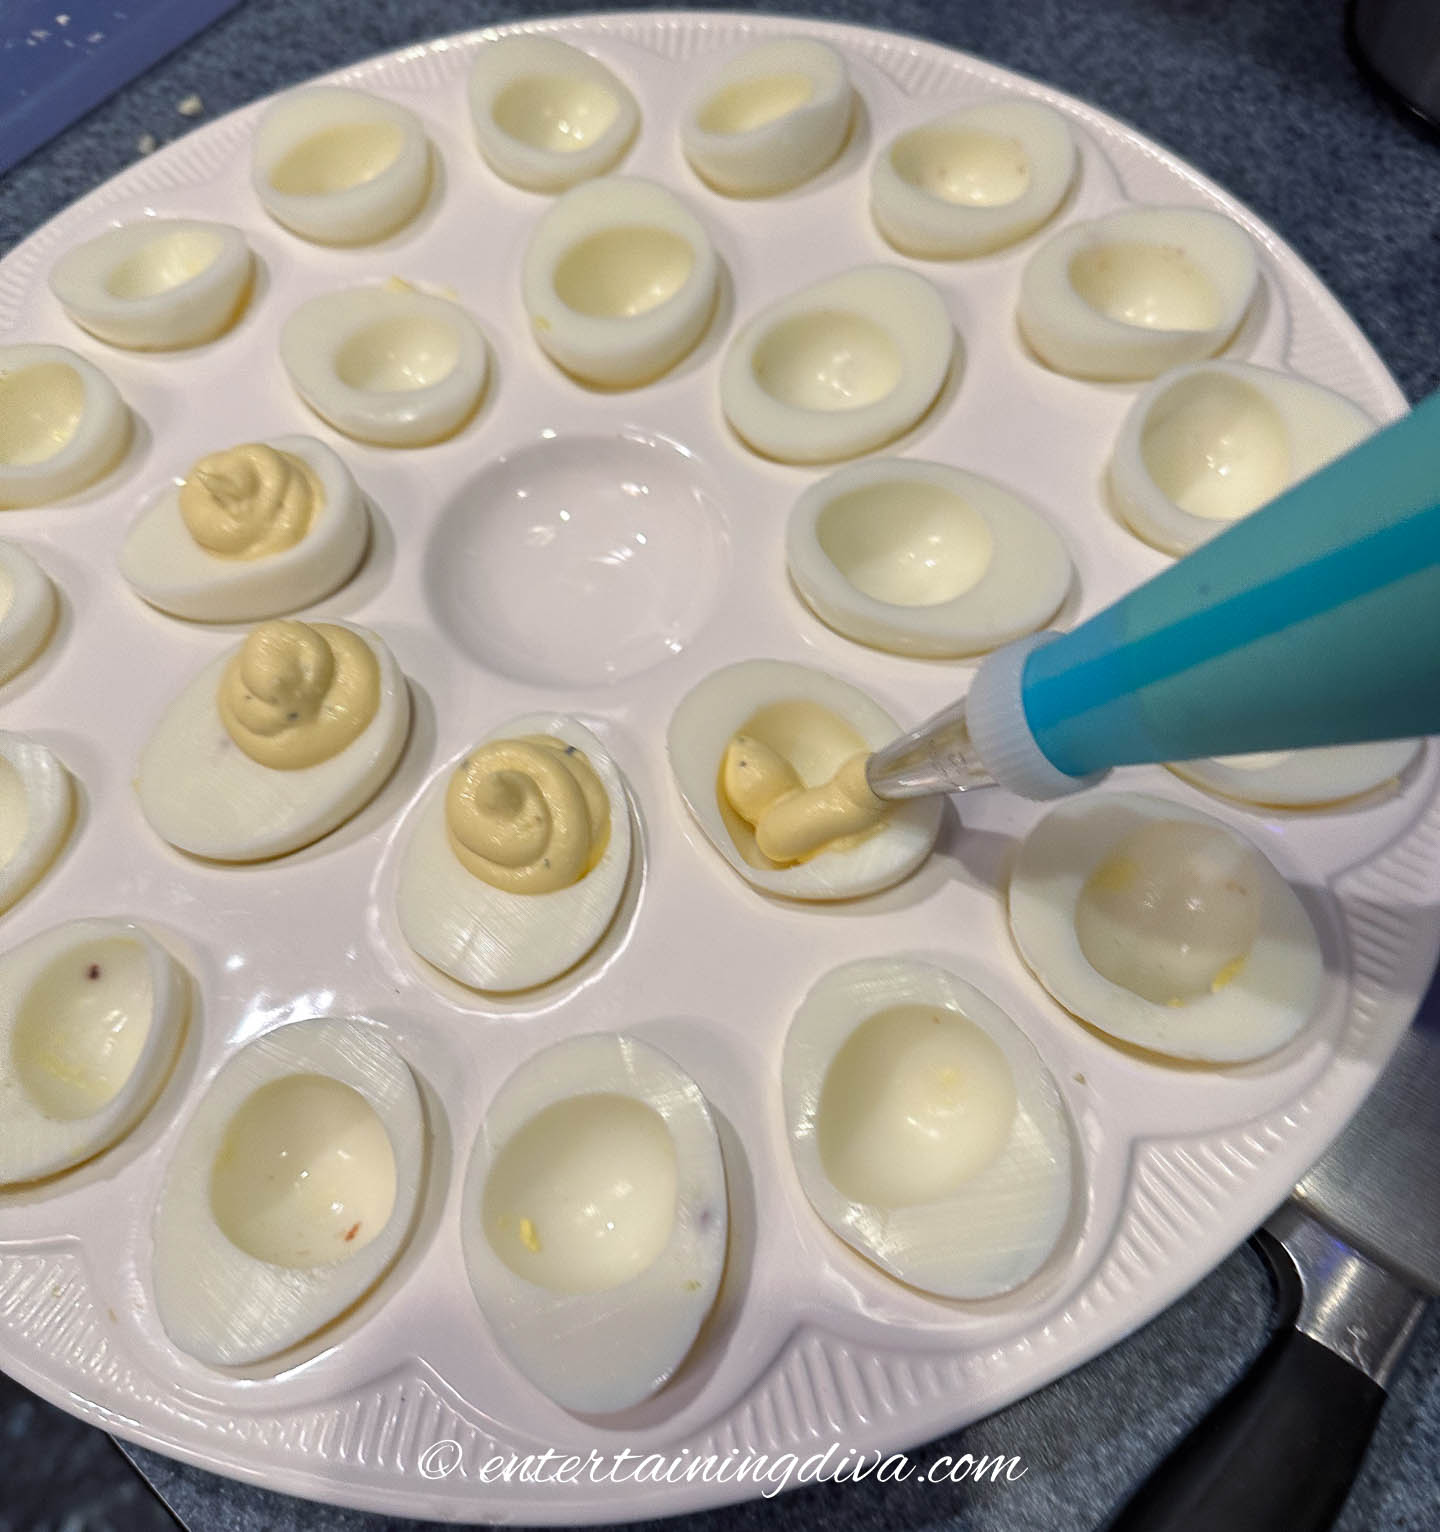 Deviled egg yolk mixture being piped into egg whites